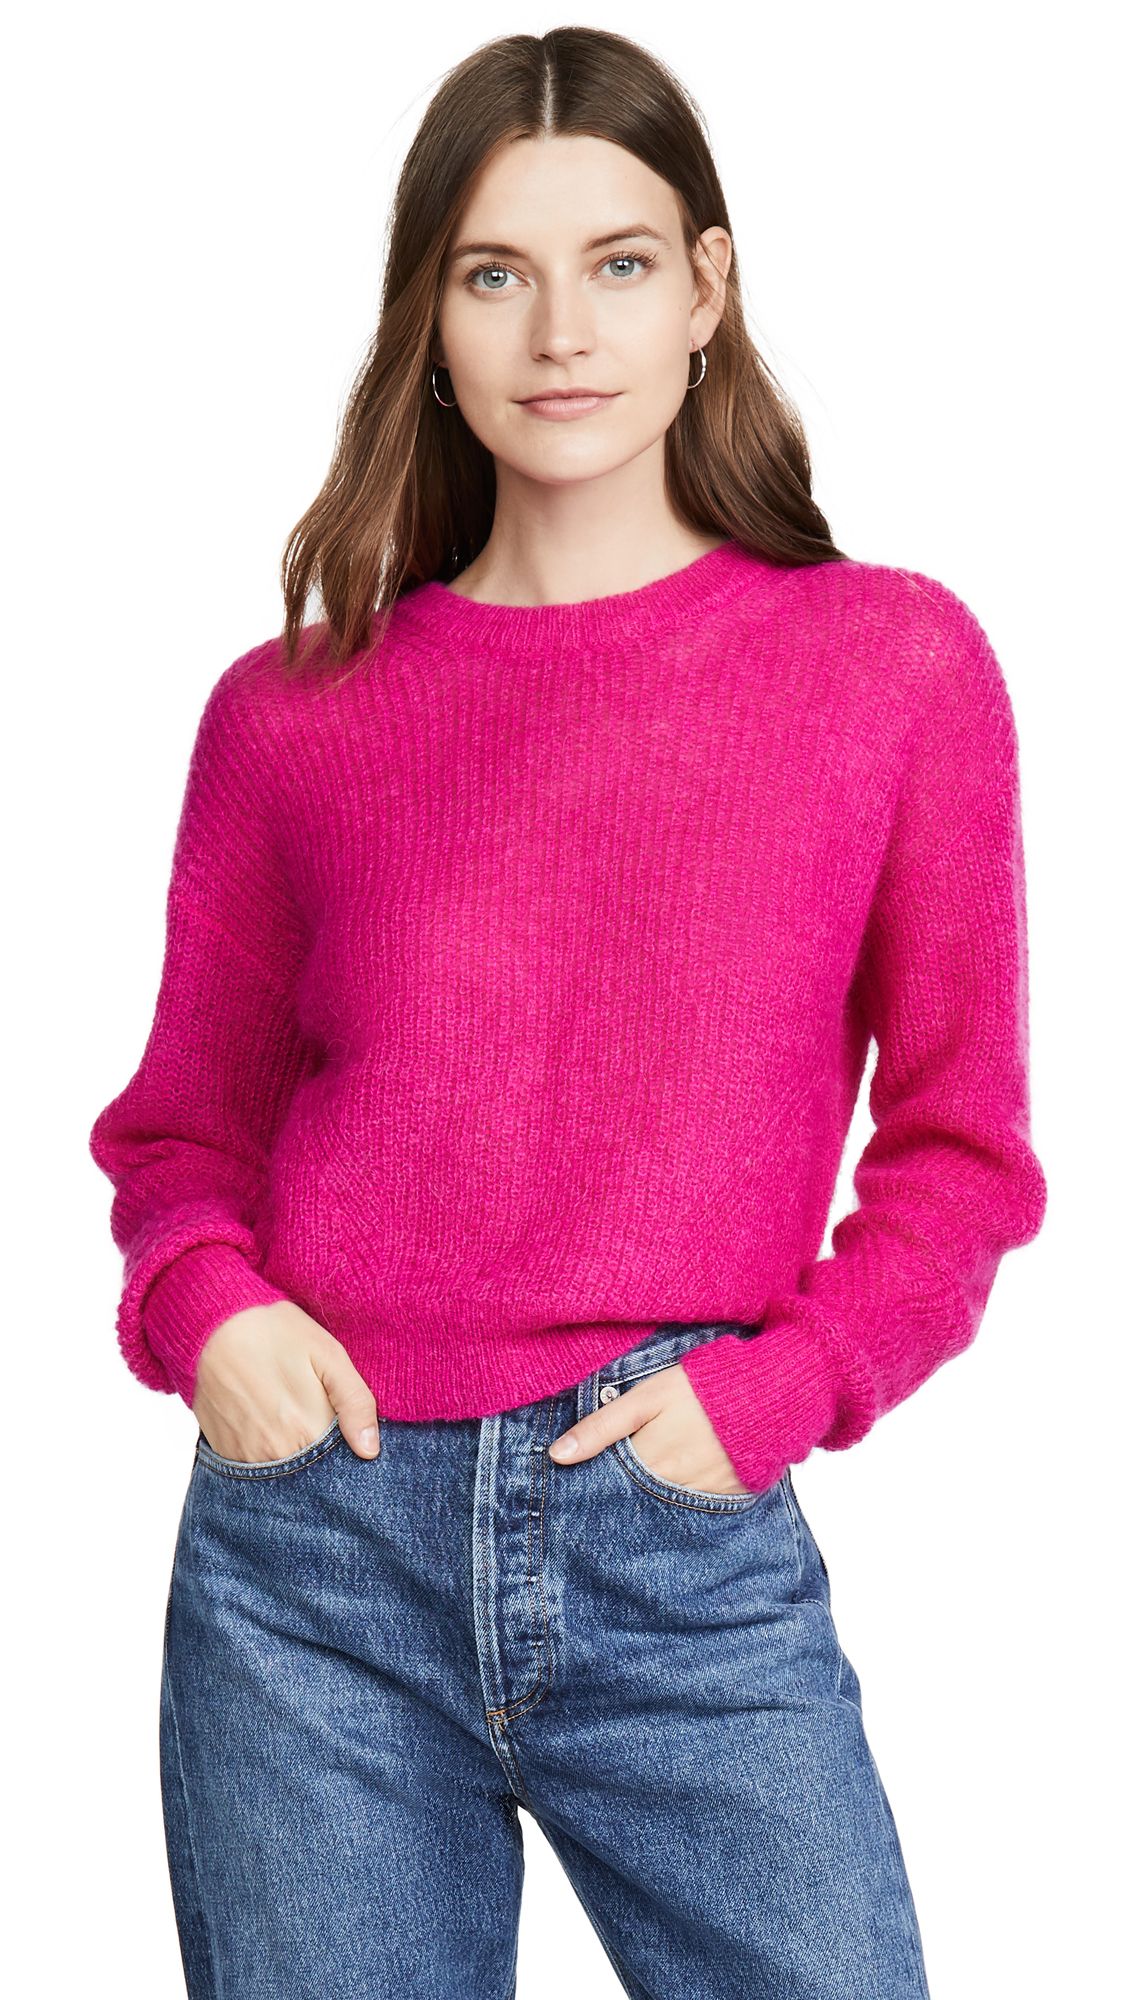 13 Pink Sweater Outfits We're Copying This Season | Who What Wear